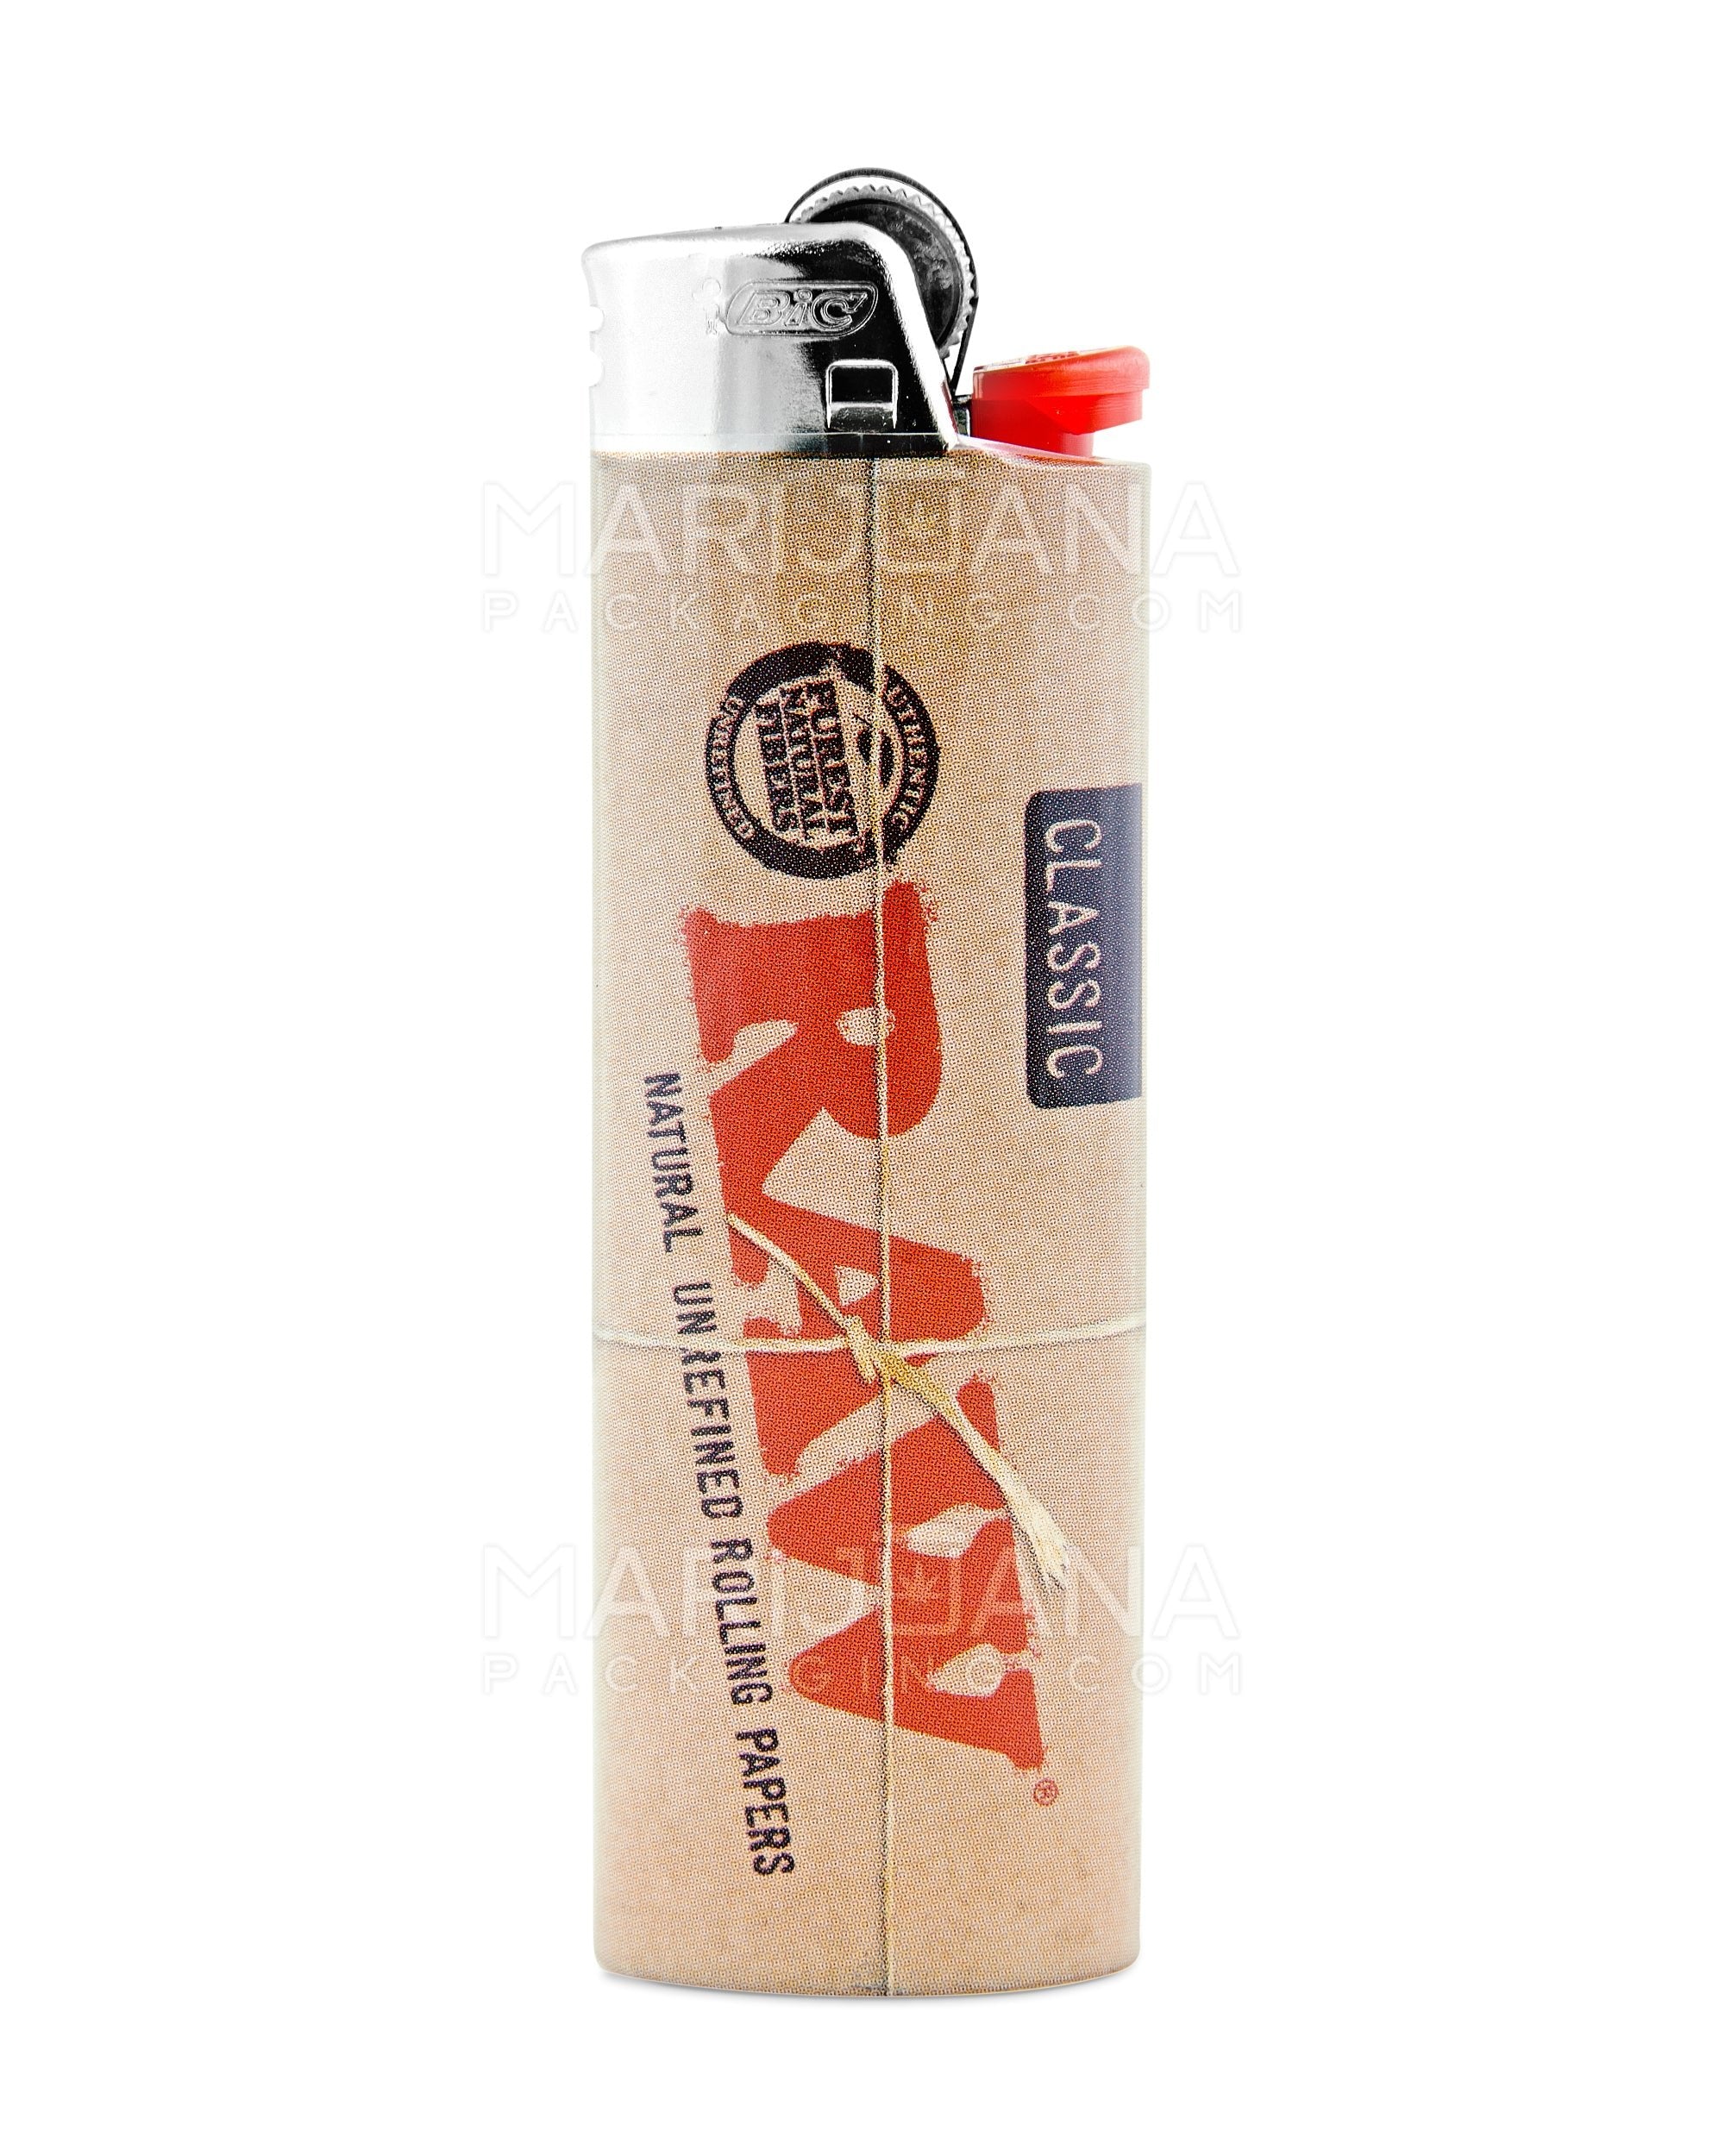 BIC | 'Retail Display' RAW Classic Edition Lighters - 50 Count - 3